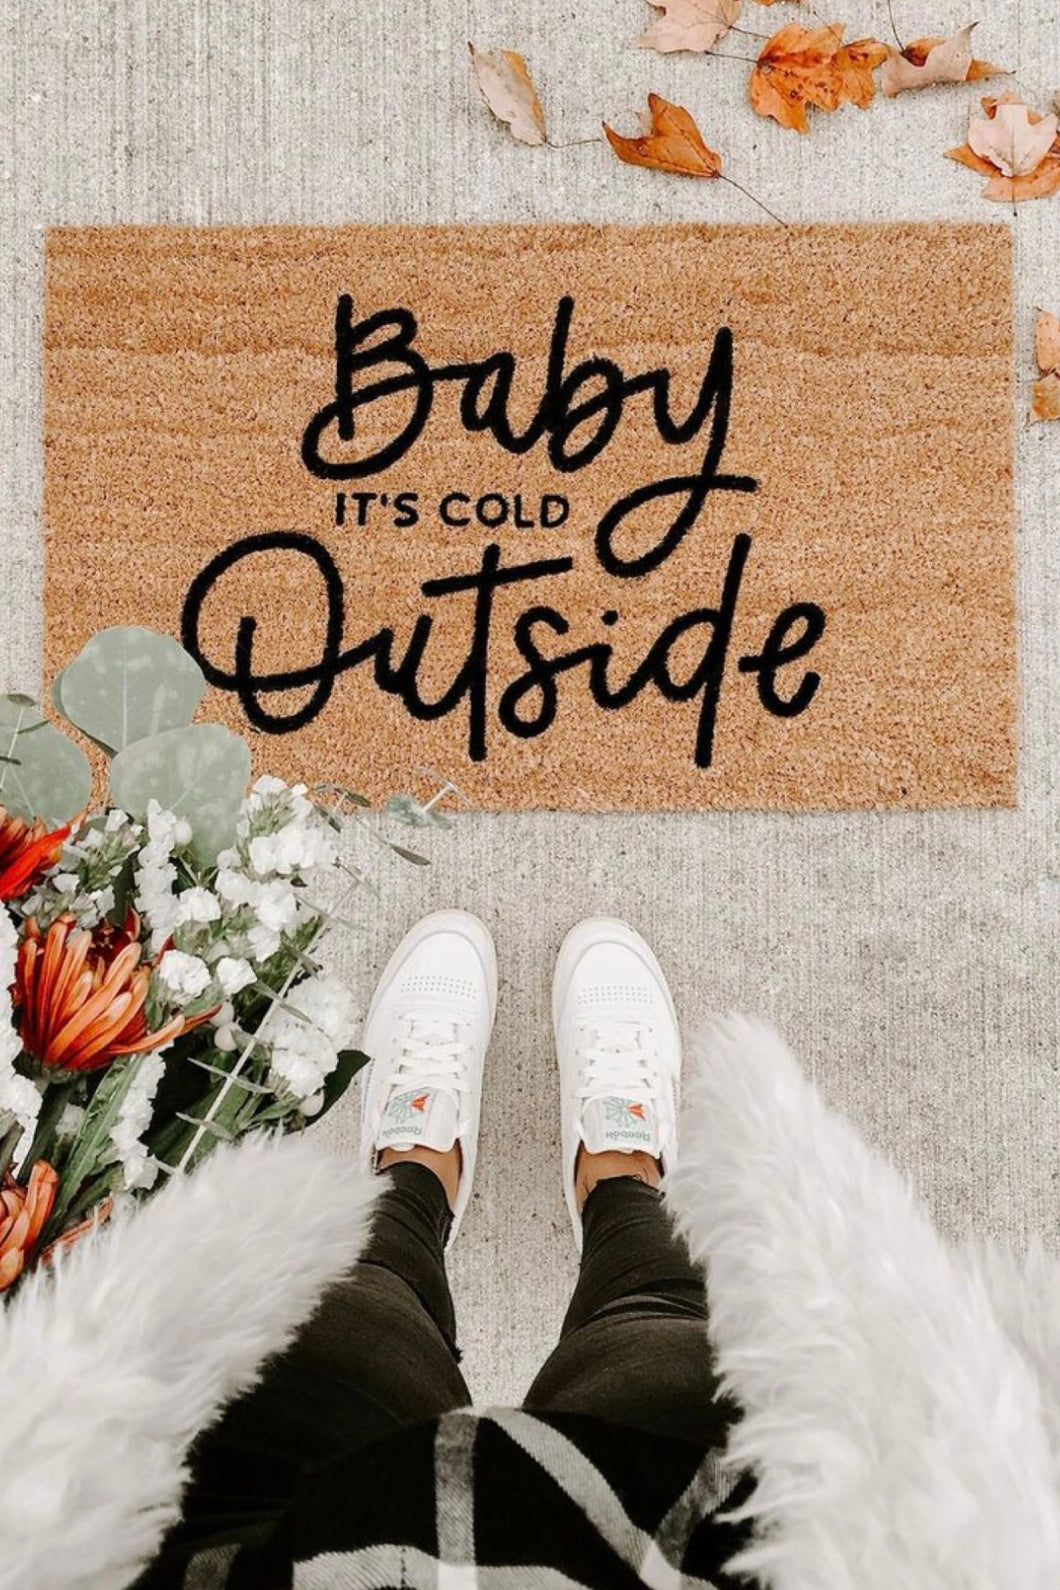 Baby it's cold outside doormat DIY at home kit